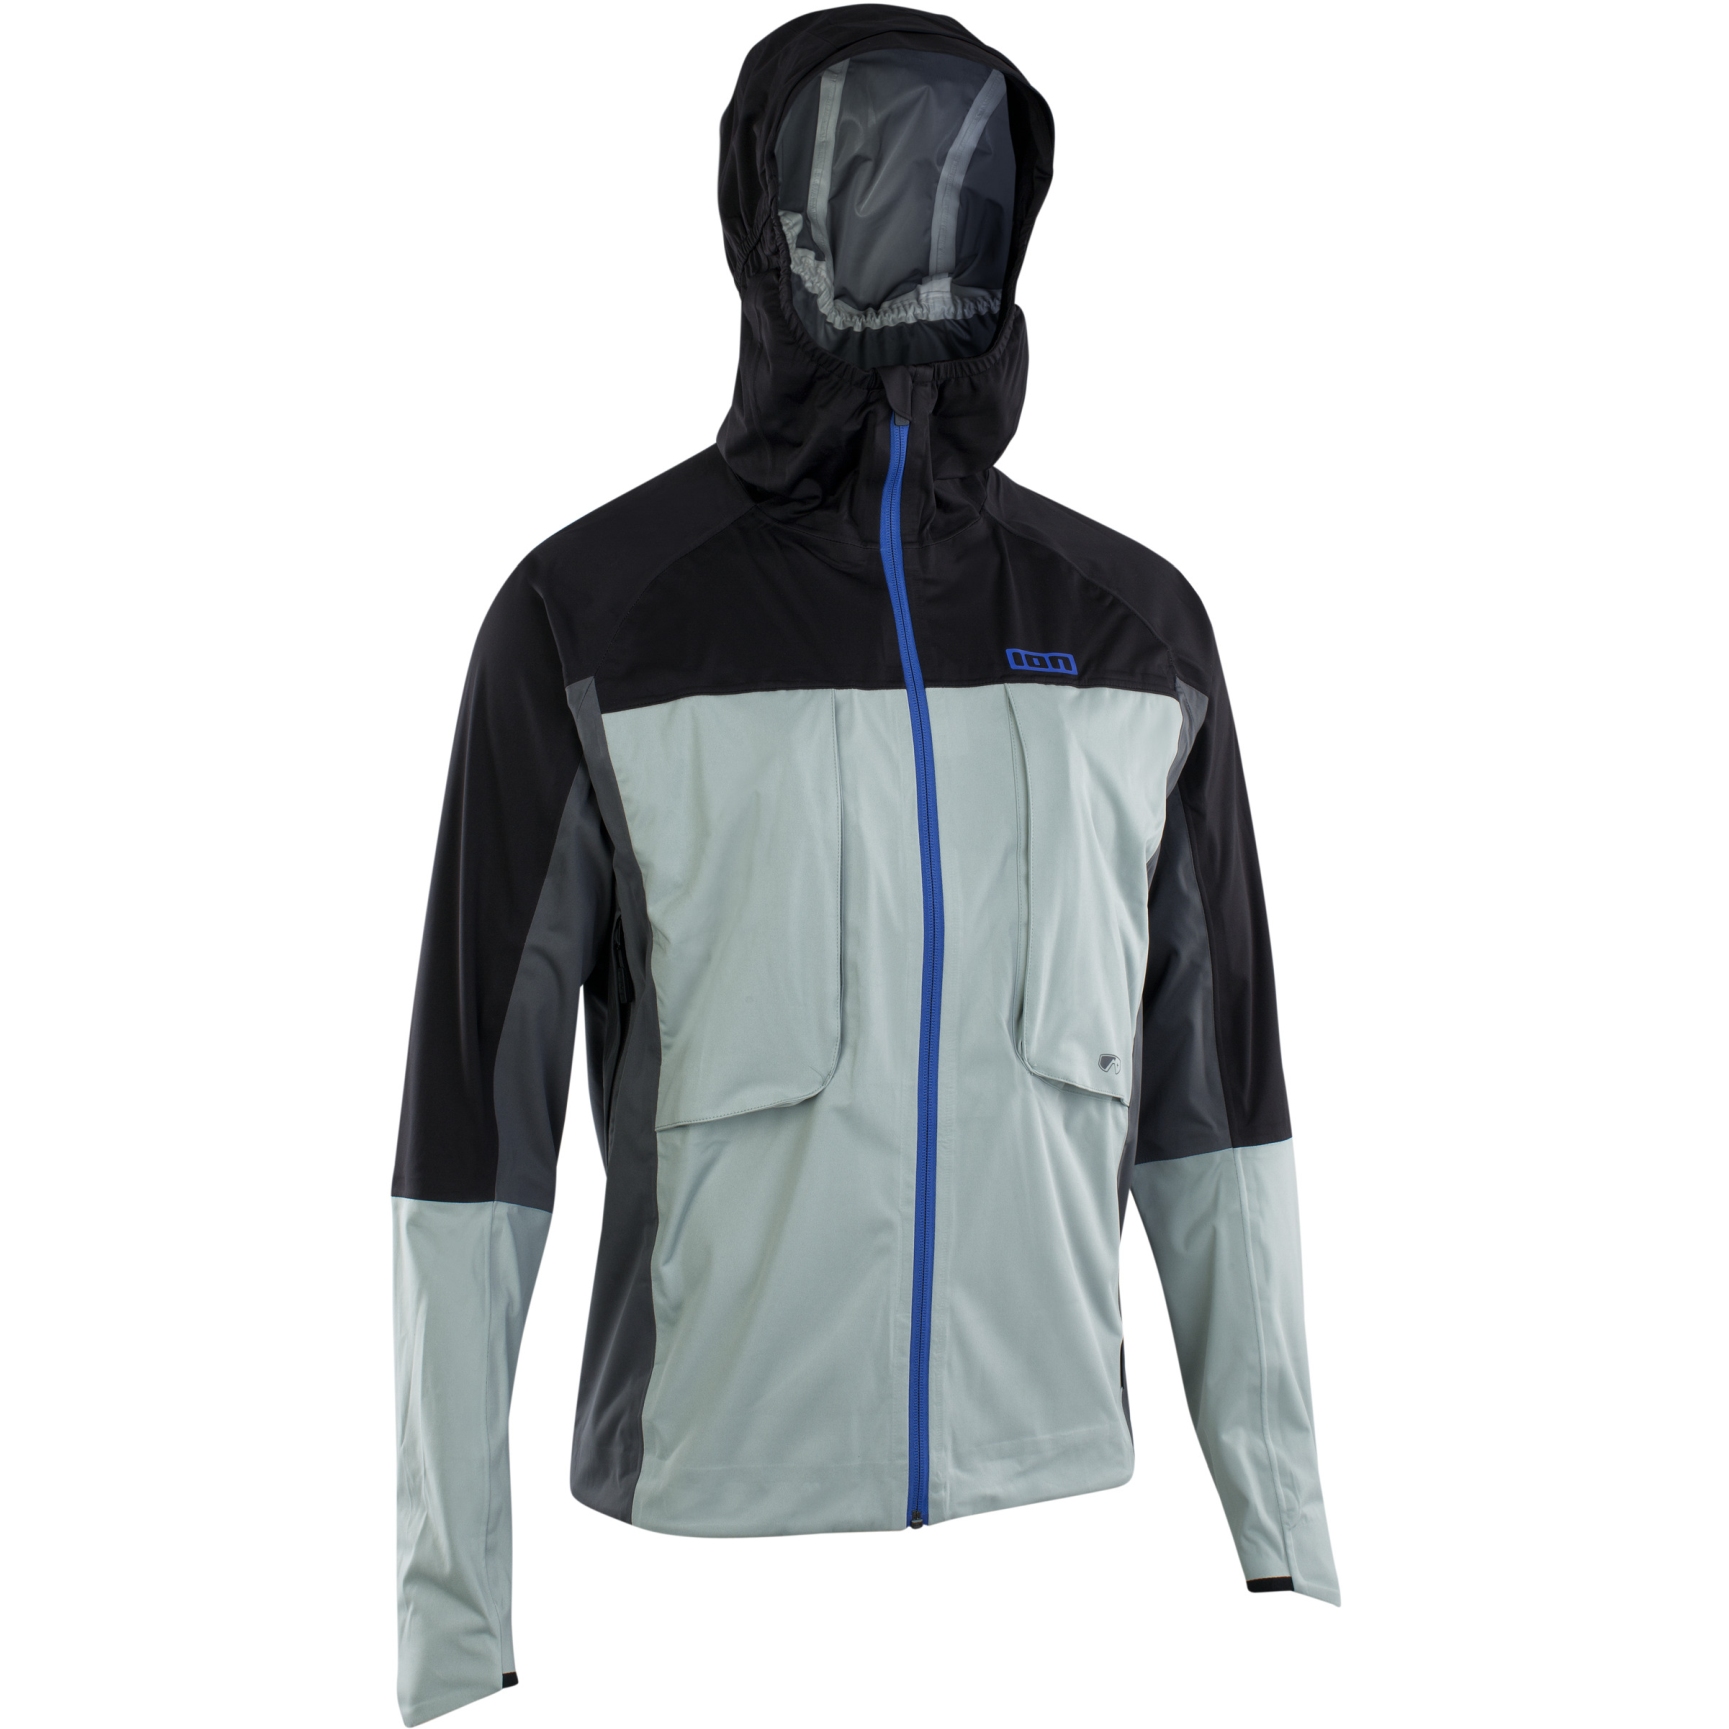 Image of ION Bike Outerwear 3 Layer Jacket Shelter - Tidal Green